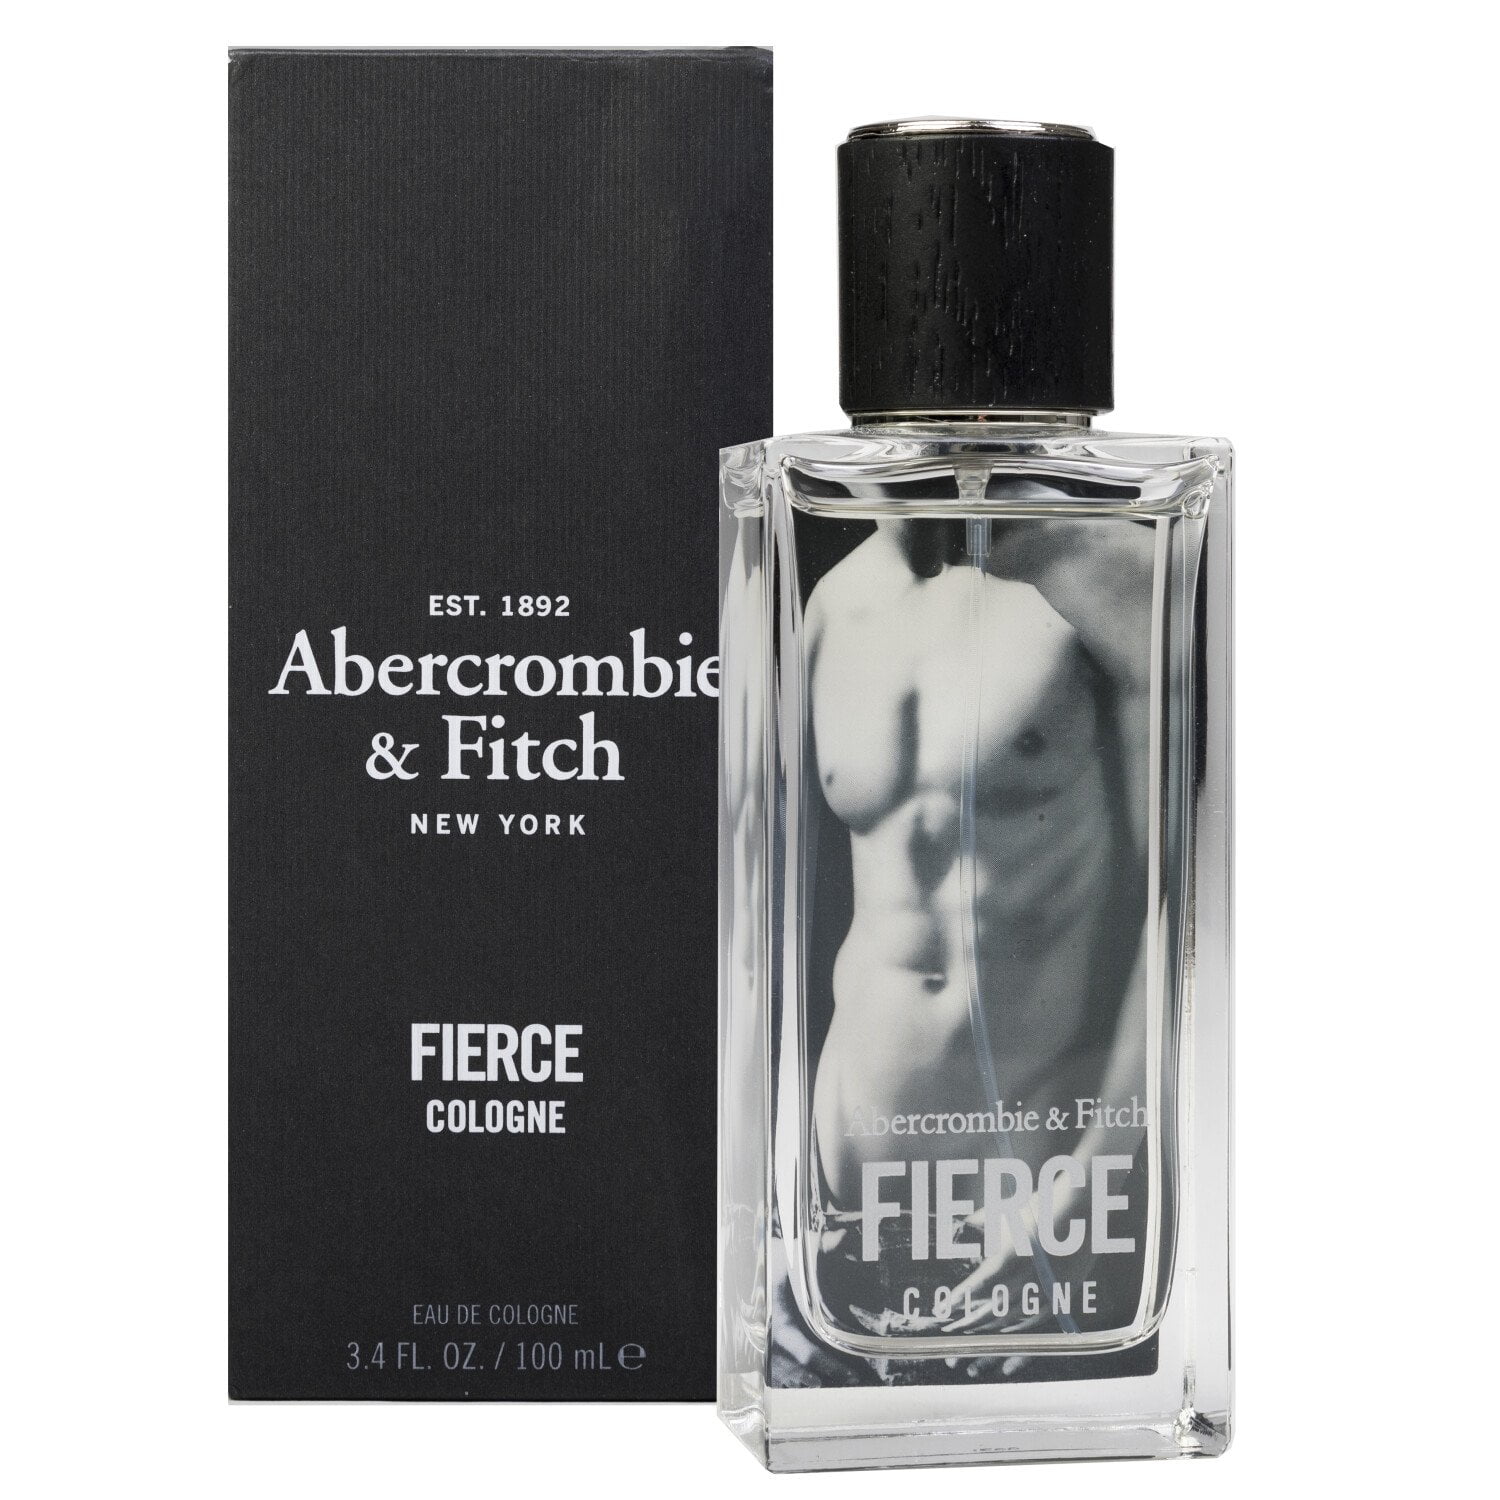 Abercrombie fitch fierce. Abercrombie Fitch Fierce Cologne 100 ml. Abercrombie & Fitch Fierce for men EDC 100 ml. Fierce Perfume Abercrombie Fitch женские 30 мл. Abercrombie & Fitch Fierce 100 тестер.